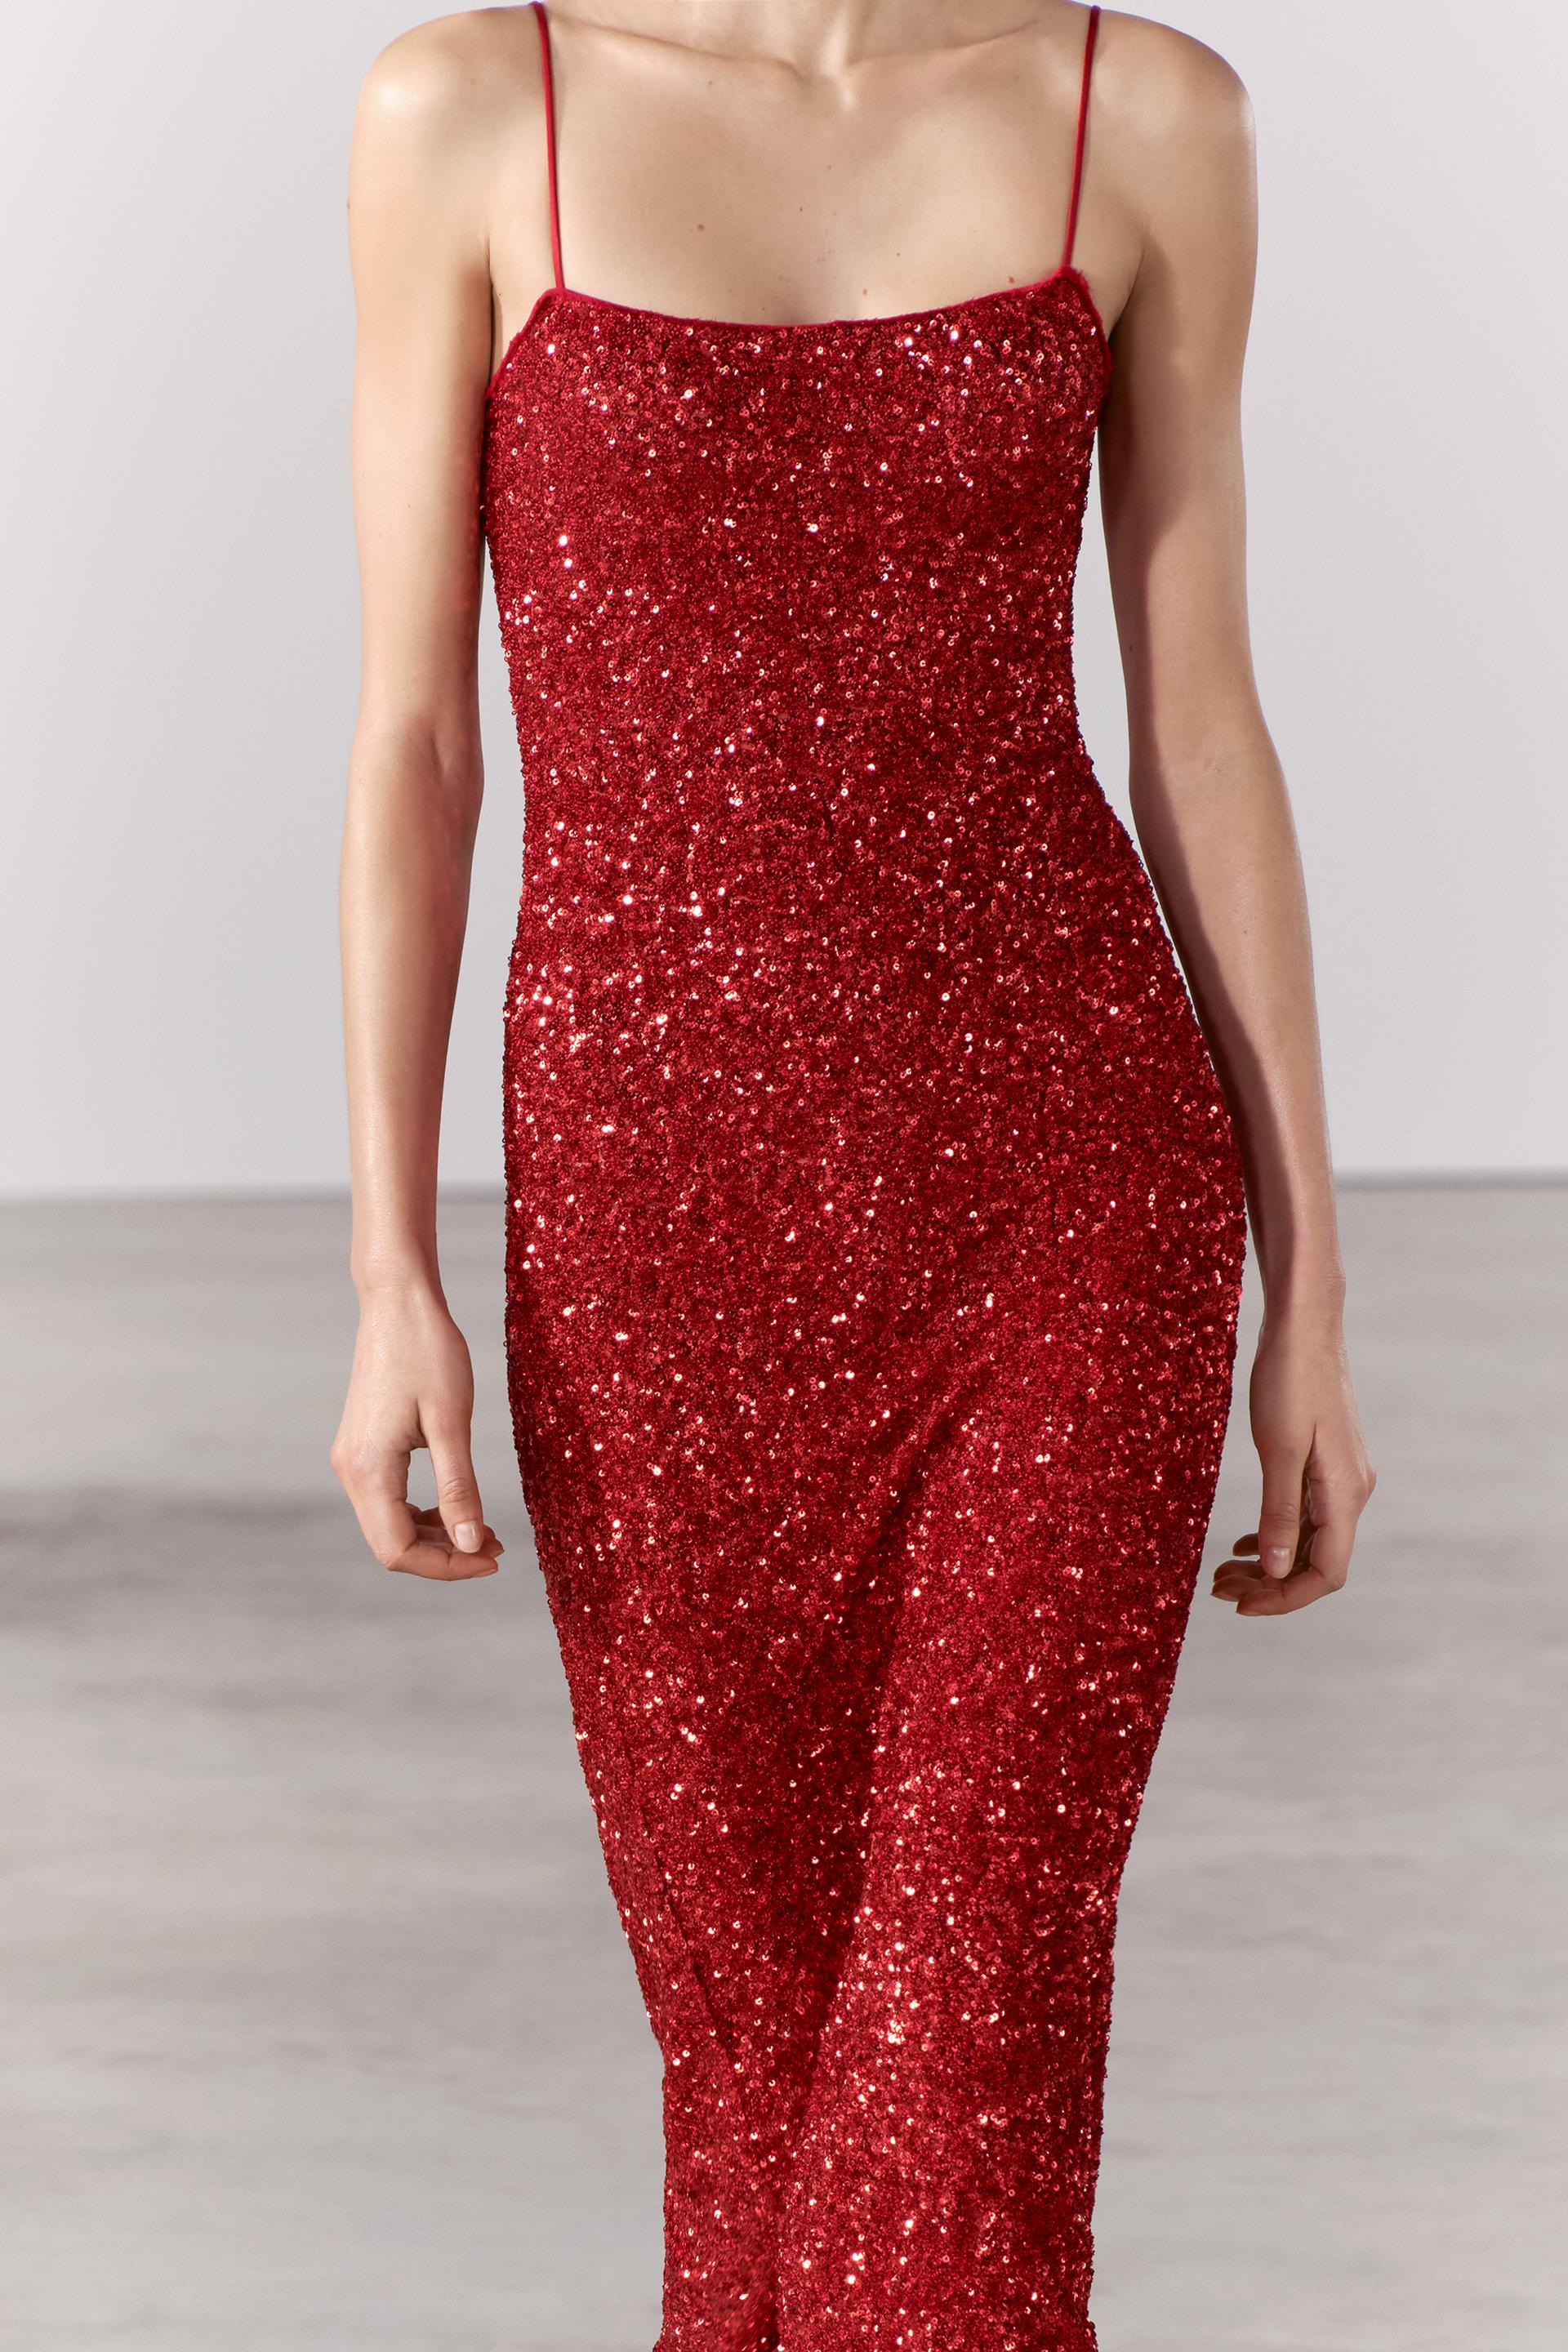 SEQUIN DRESS ZW COLLECTION